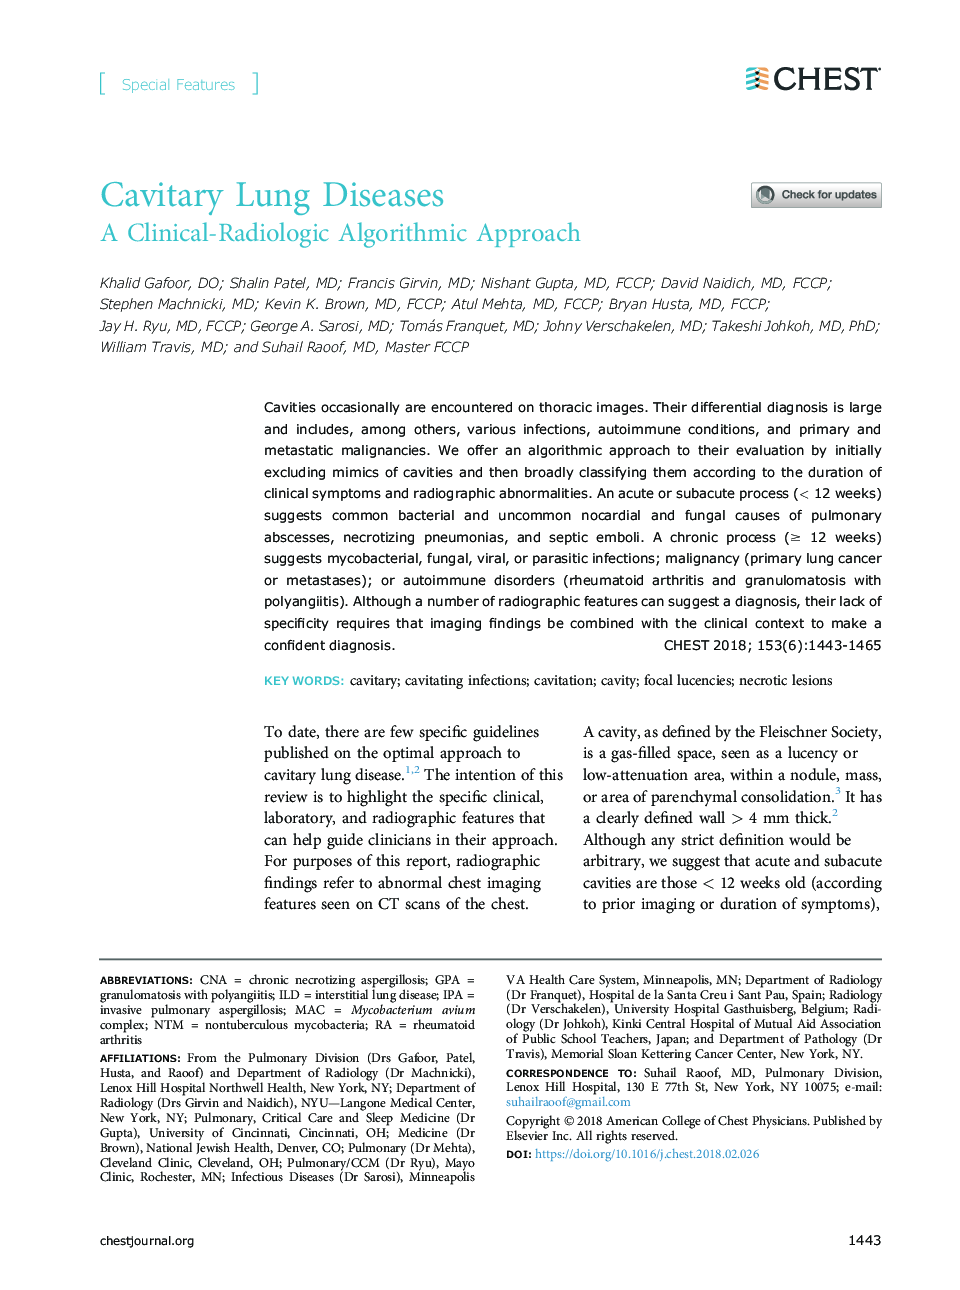 Cavitary Lung Diseases